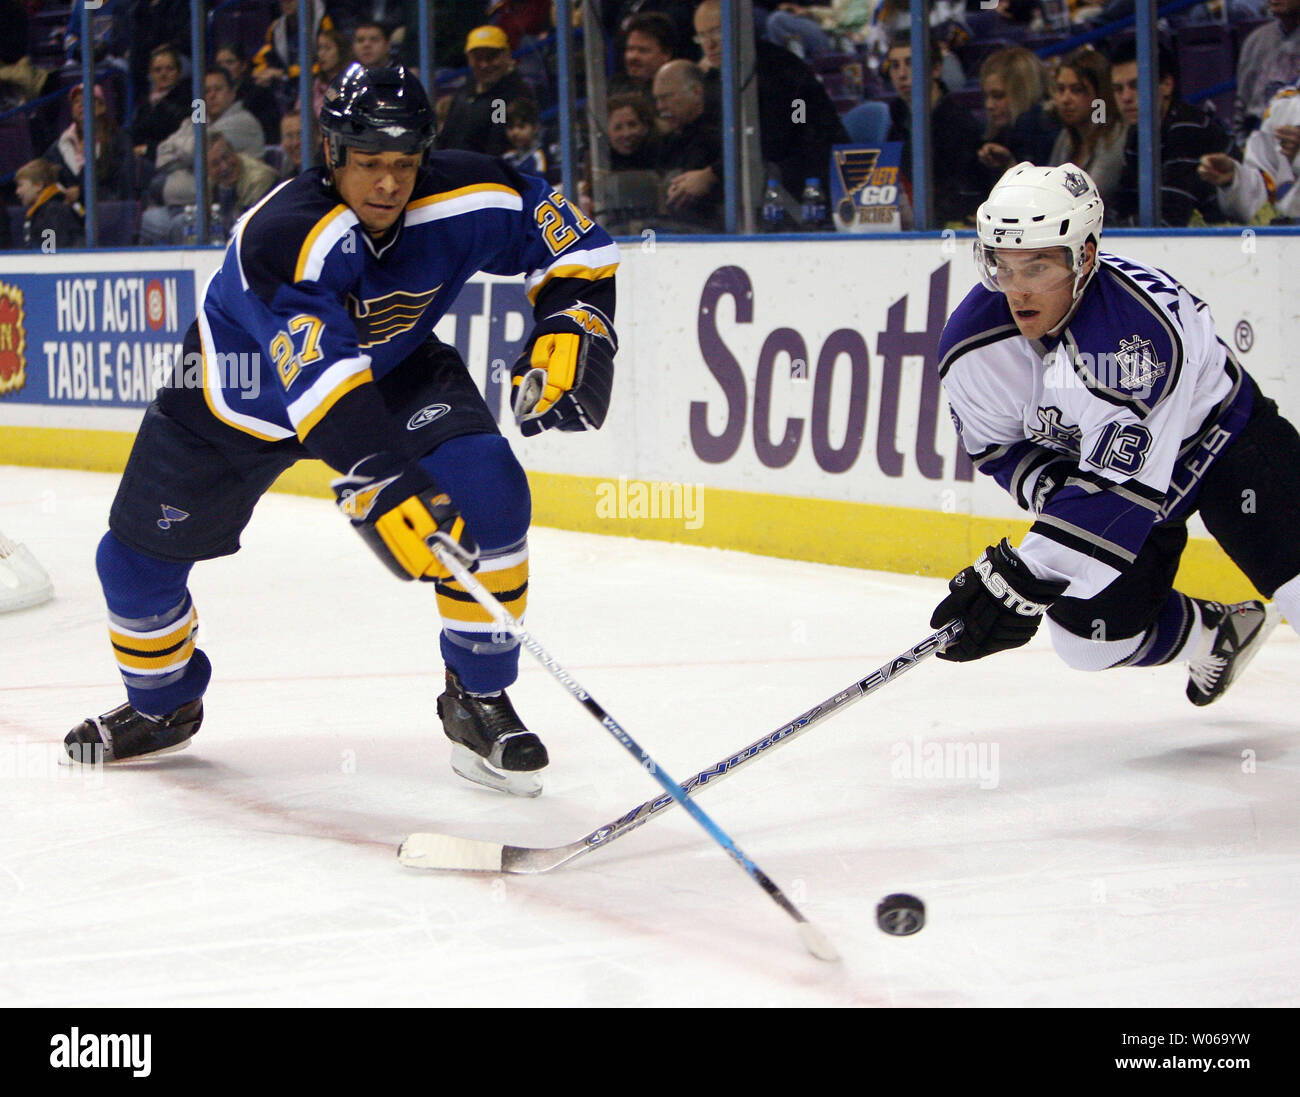 St. Louis Blues Bryce Salvador (L) tries to beat Los Angeles Kings Michael Cammalleri to the puck during the first period at the Scottrade Center in St. Louis on January 13, 2007. (UPI Photo/Bill Greenblatt) Stock Photo